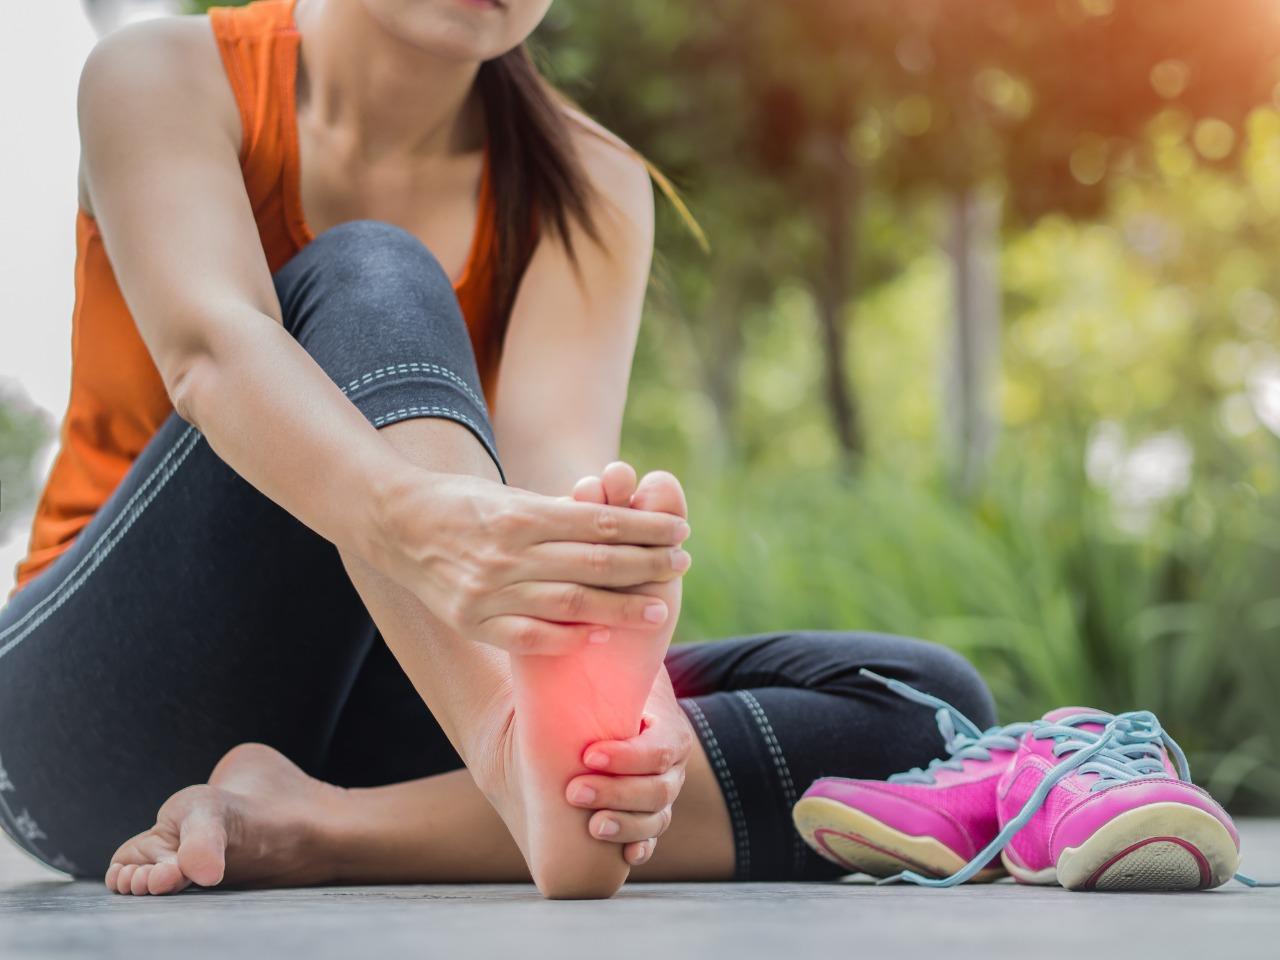 How Stretches Can Benefit the Feet